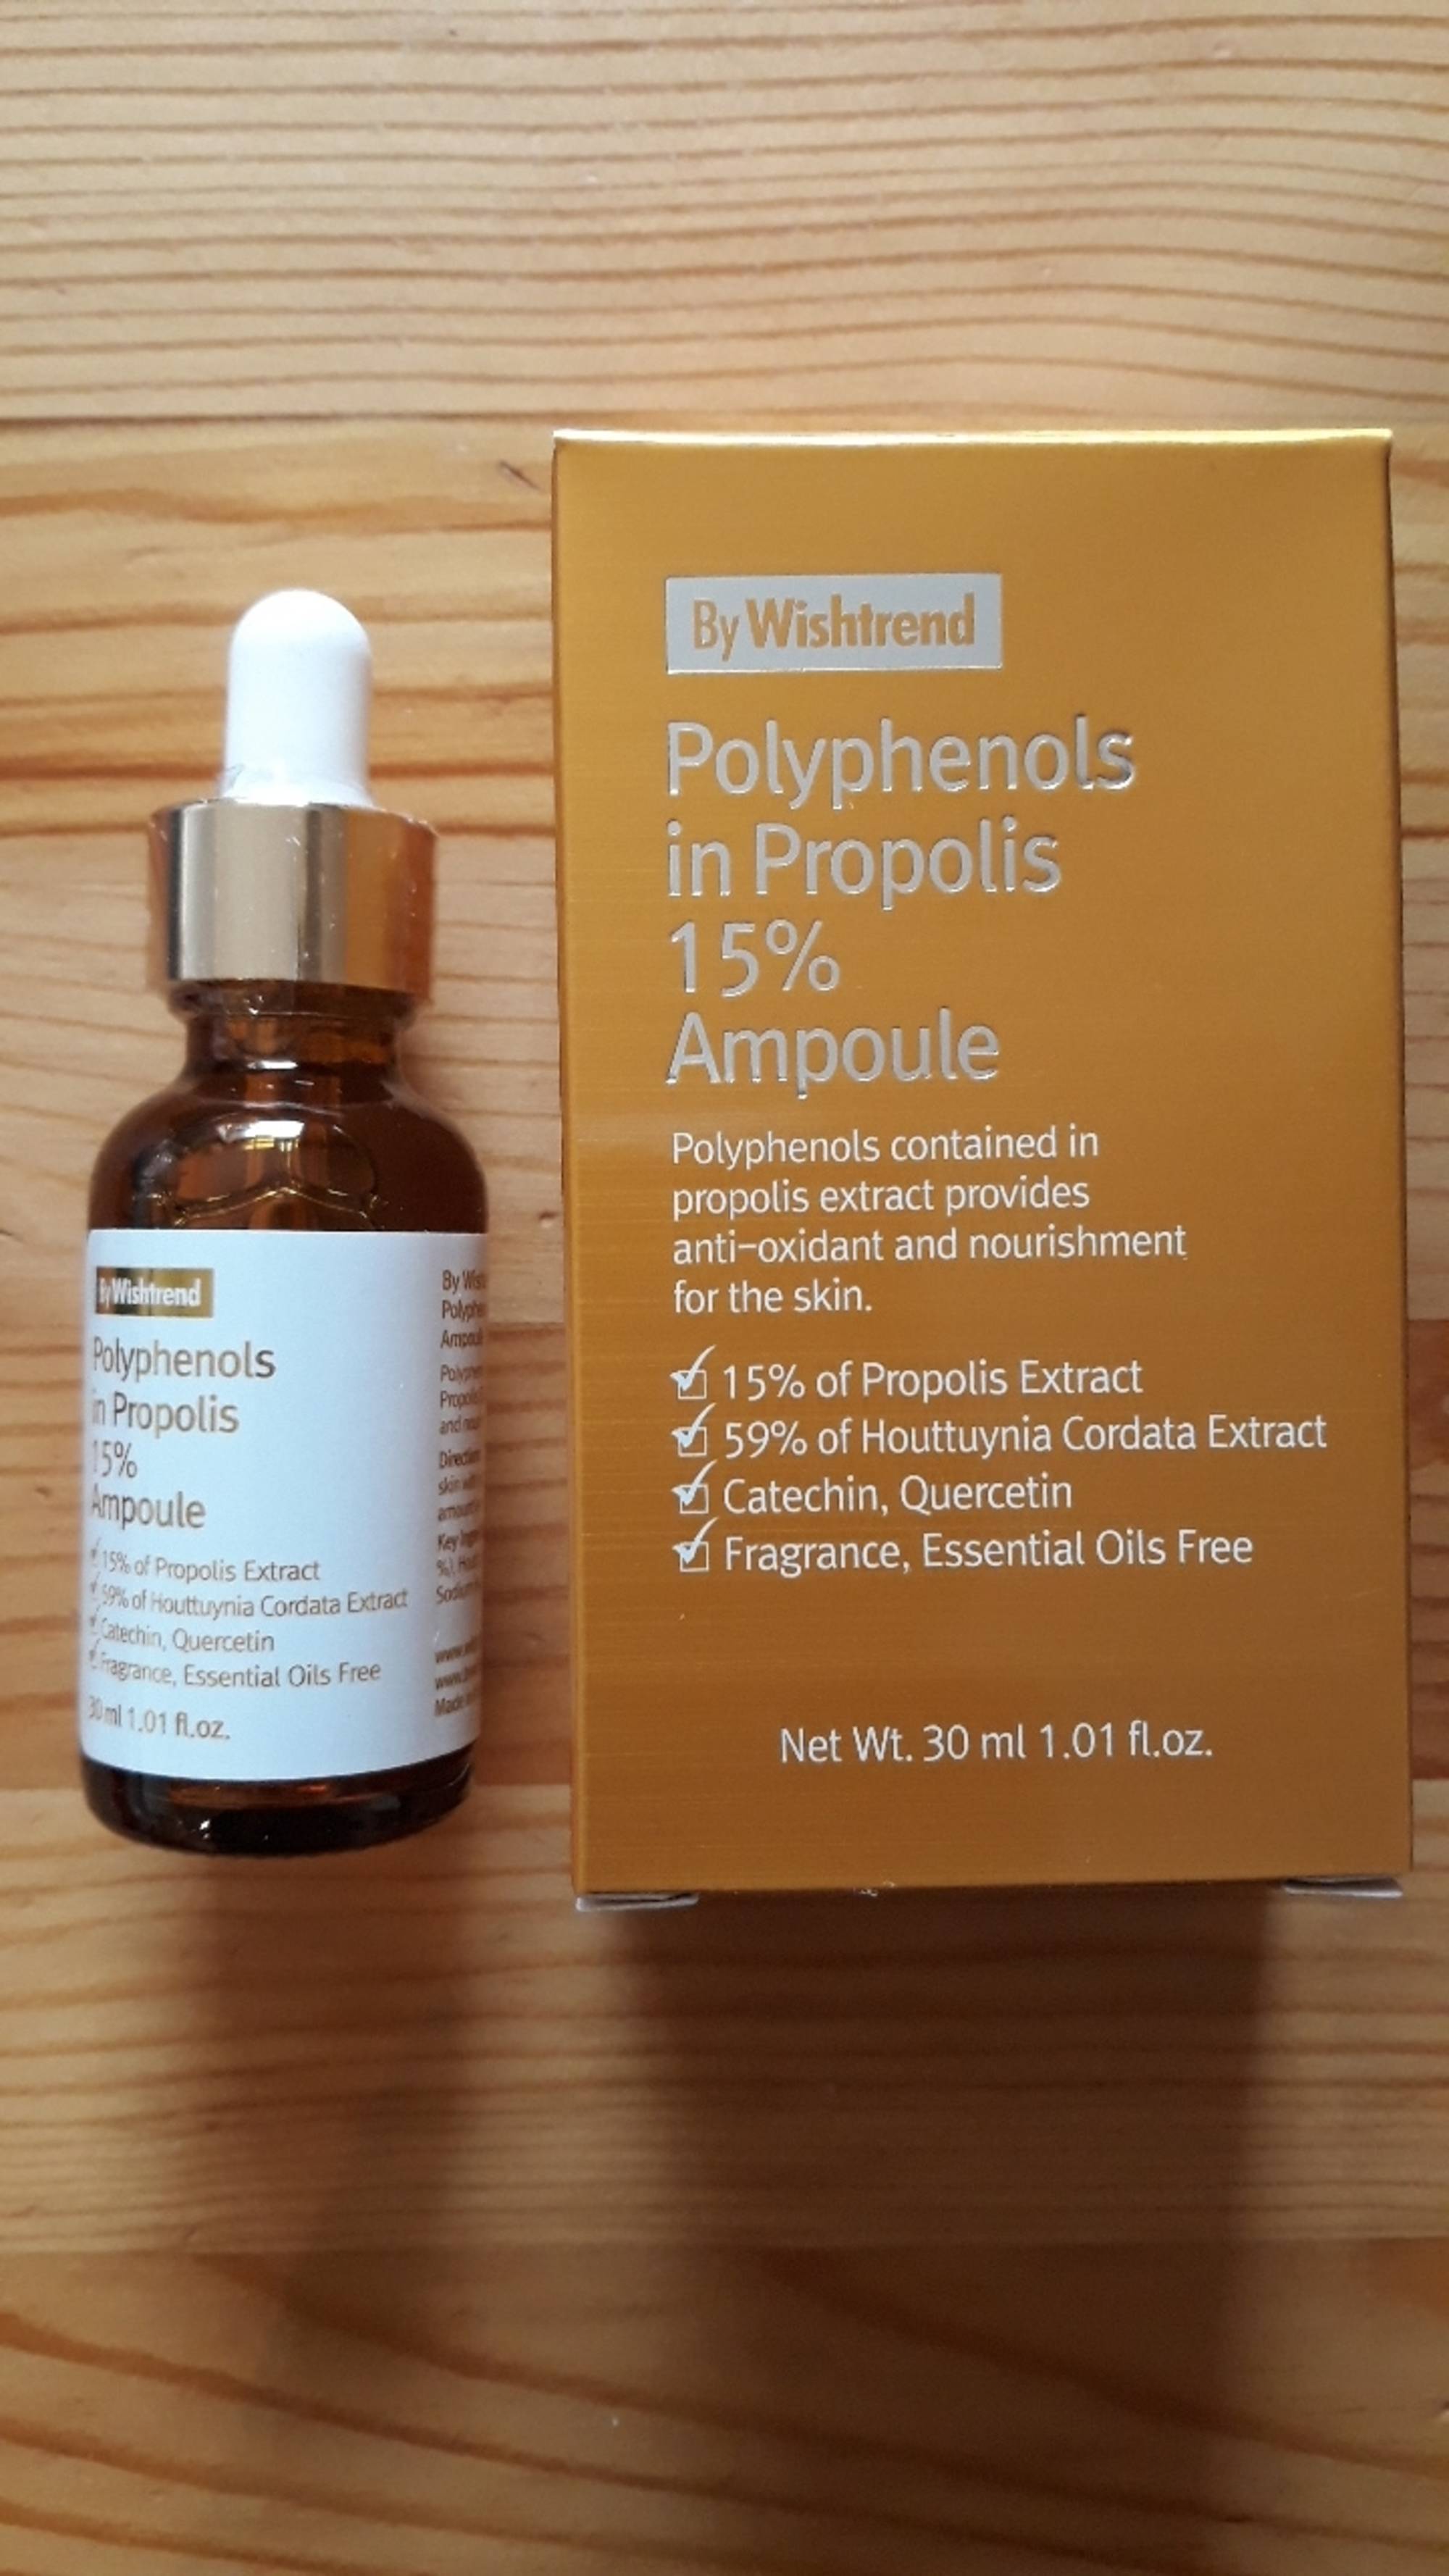 BY WISHTREND - Polyphenols in propolis 15% ampoule